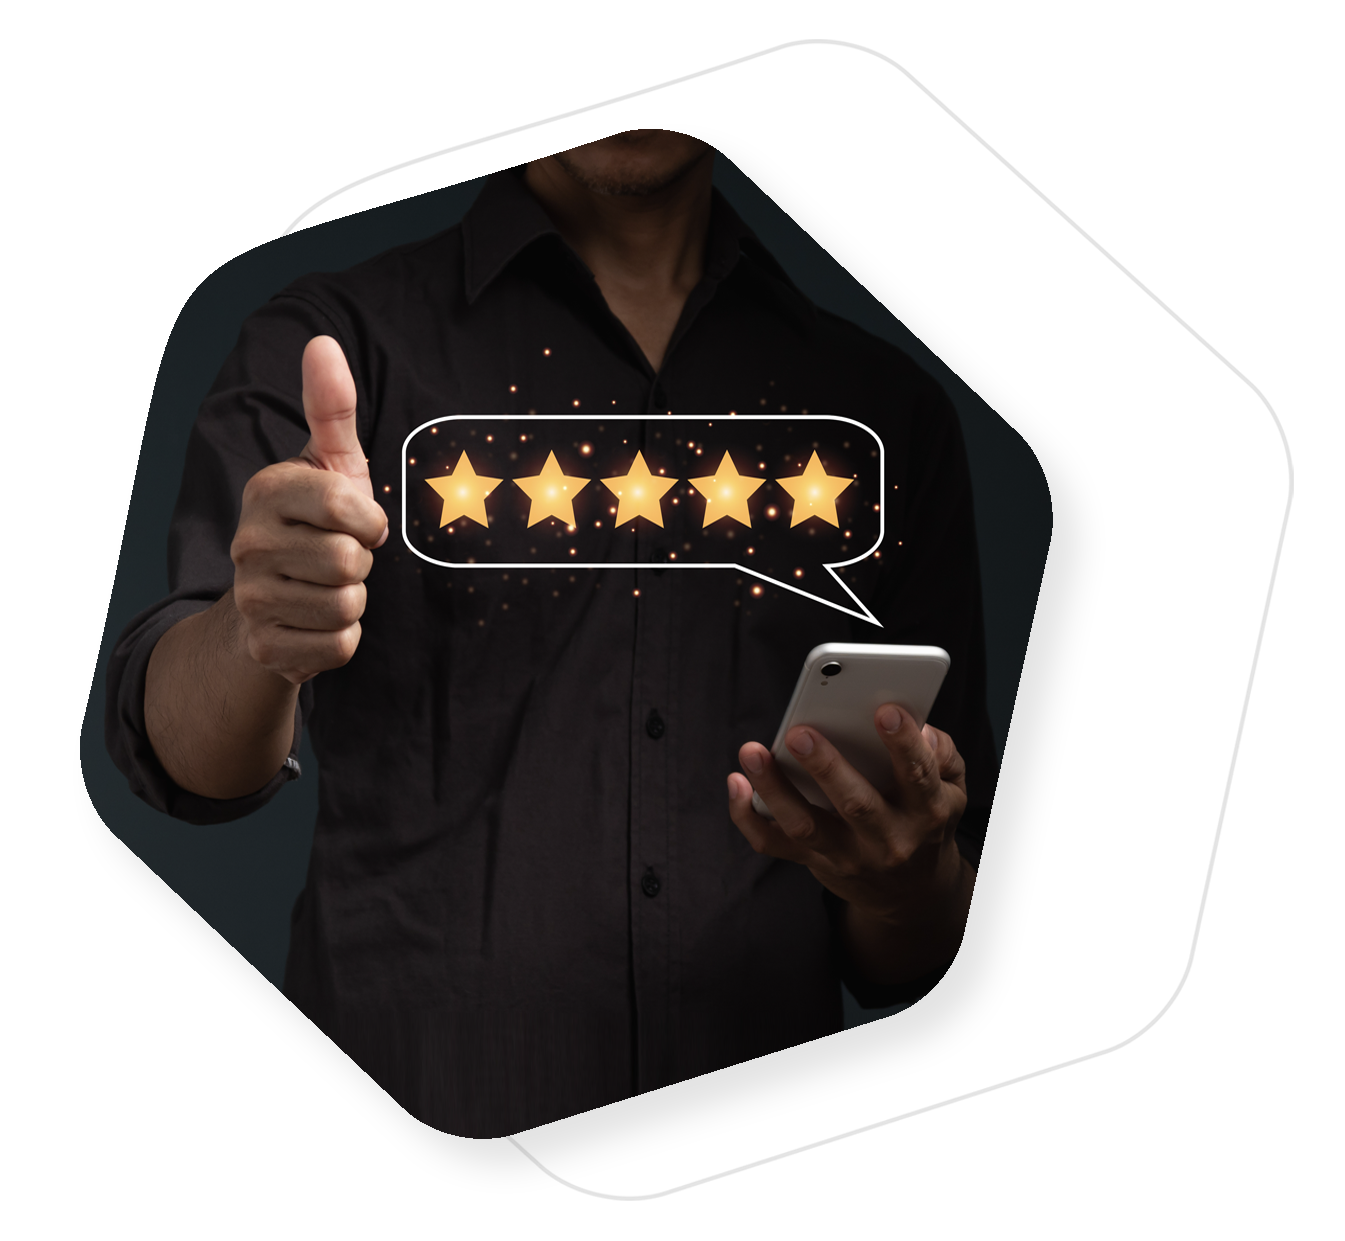 thumbs up with 5 stars